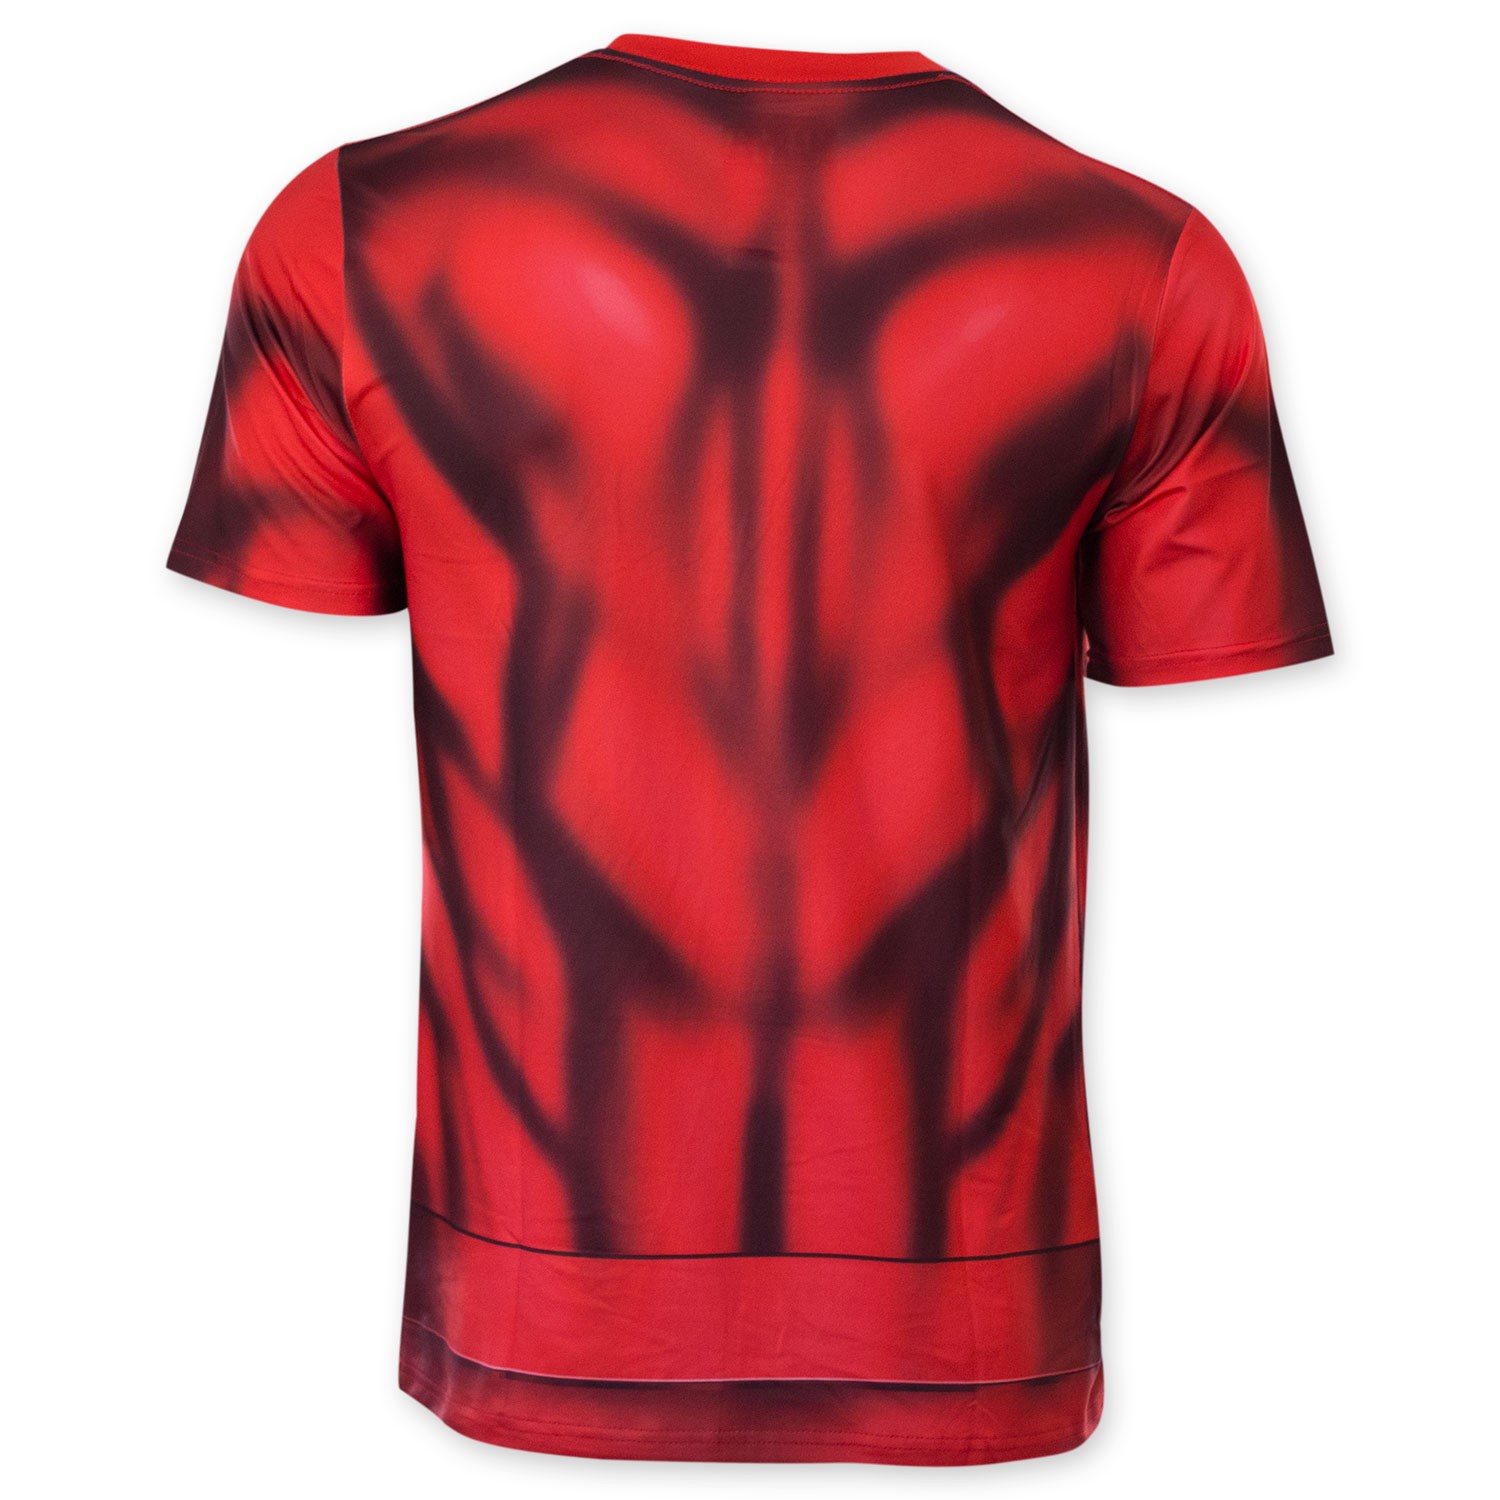 Daredevil Sublimated Costume Tee Shirt